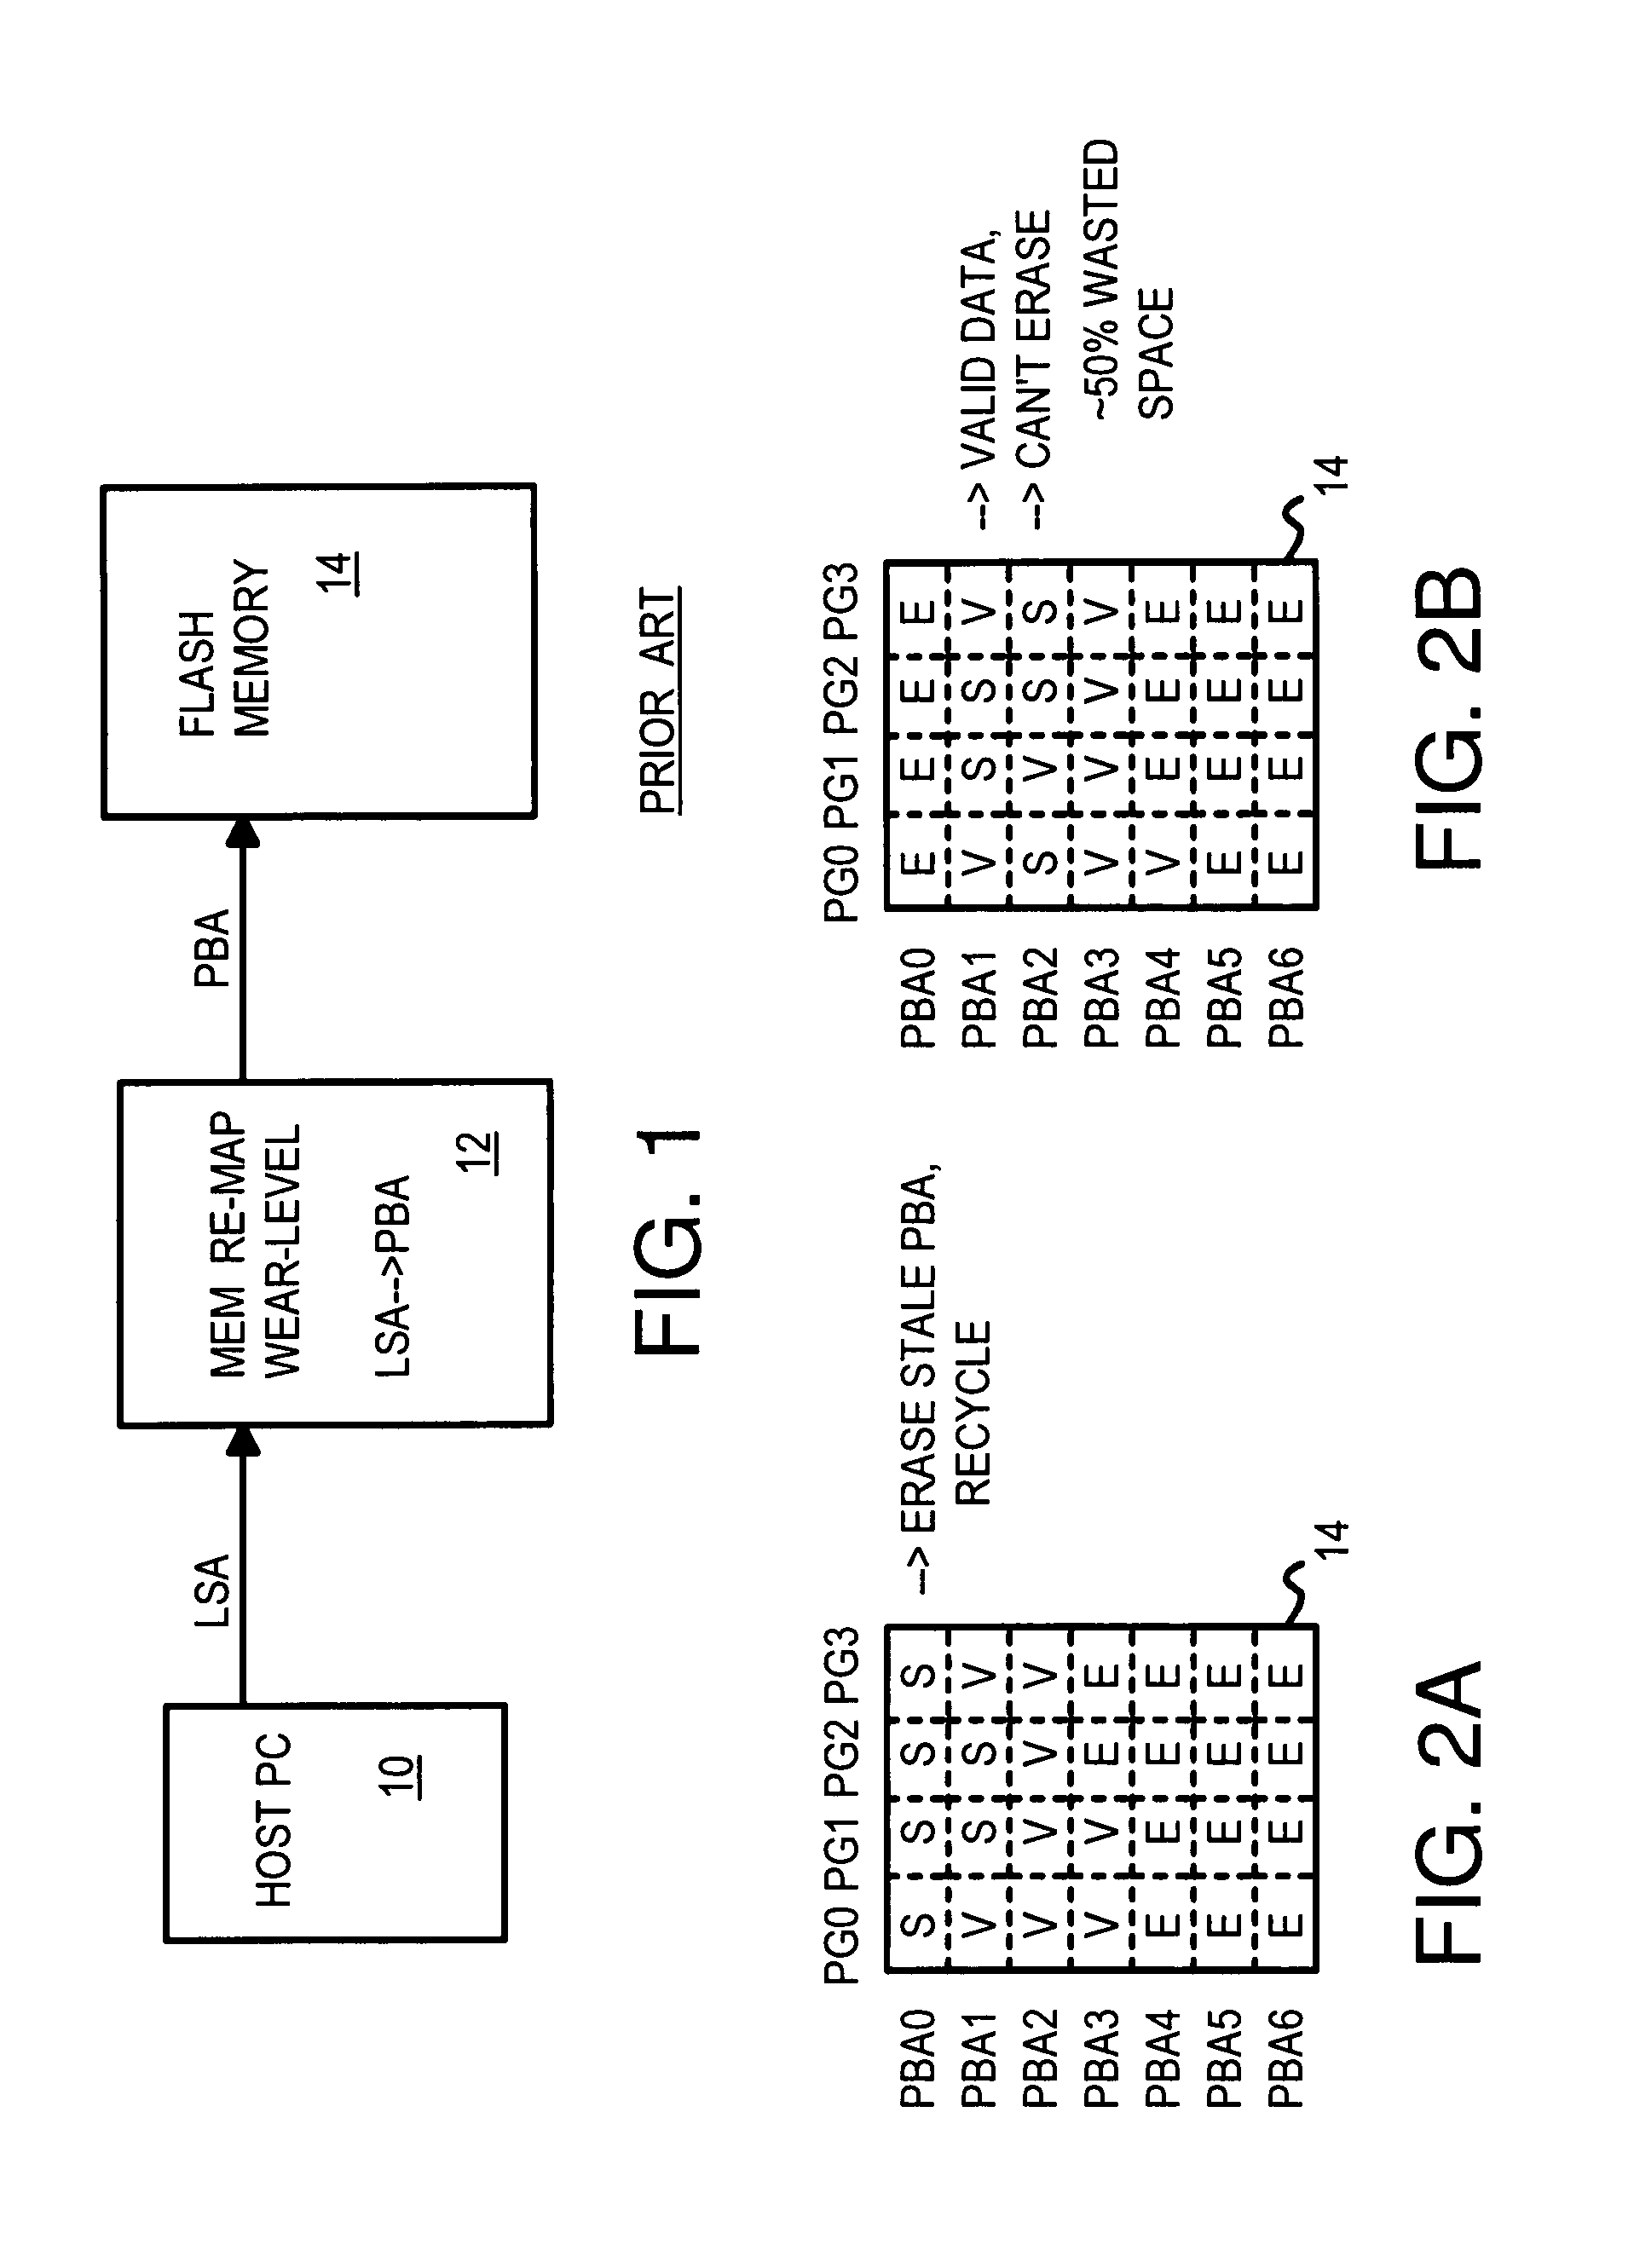 Multi-channel flash module with plane-interleaved sequential ECC writes and background recycling to restricted-write flash chips